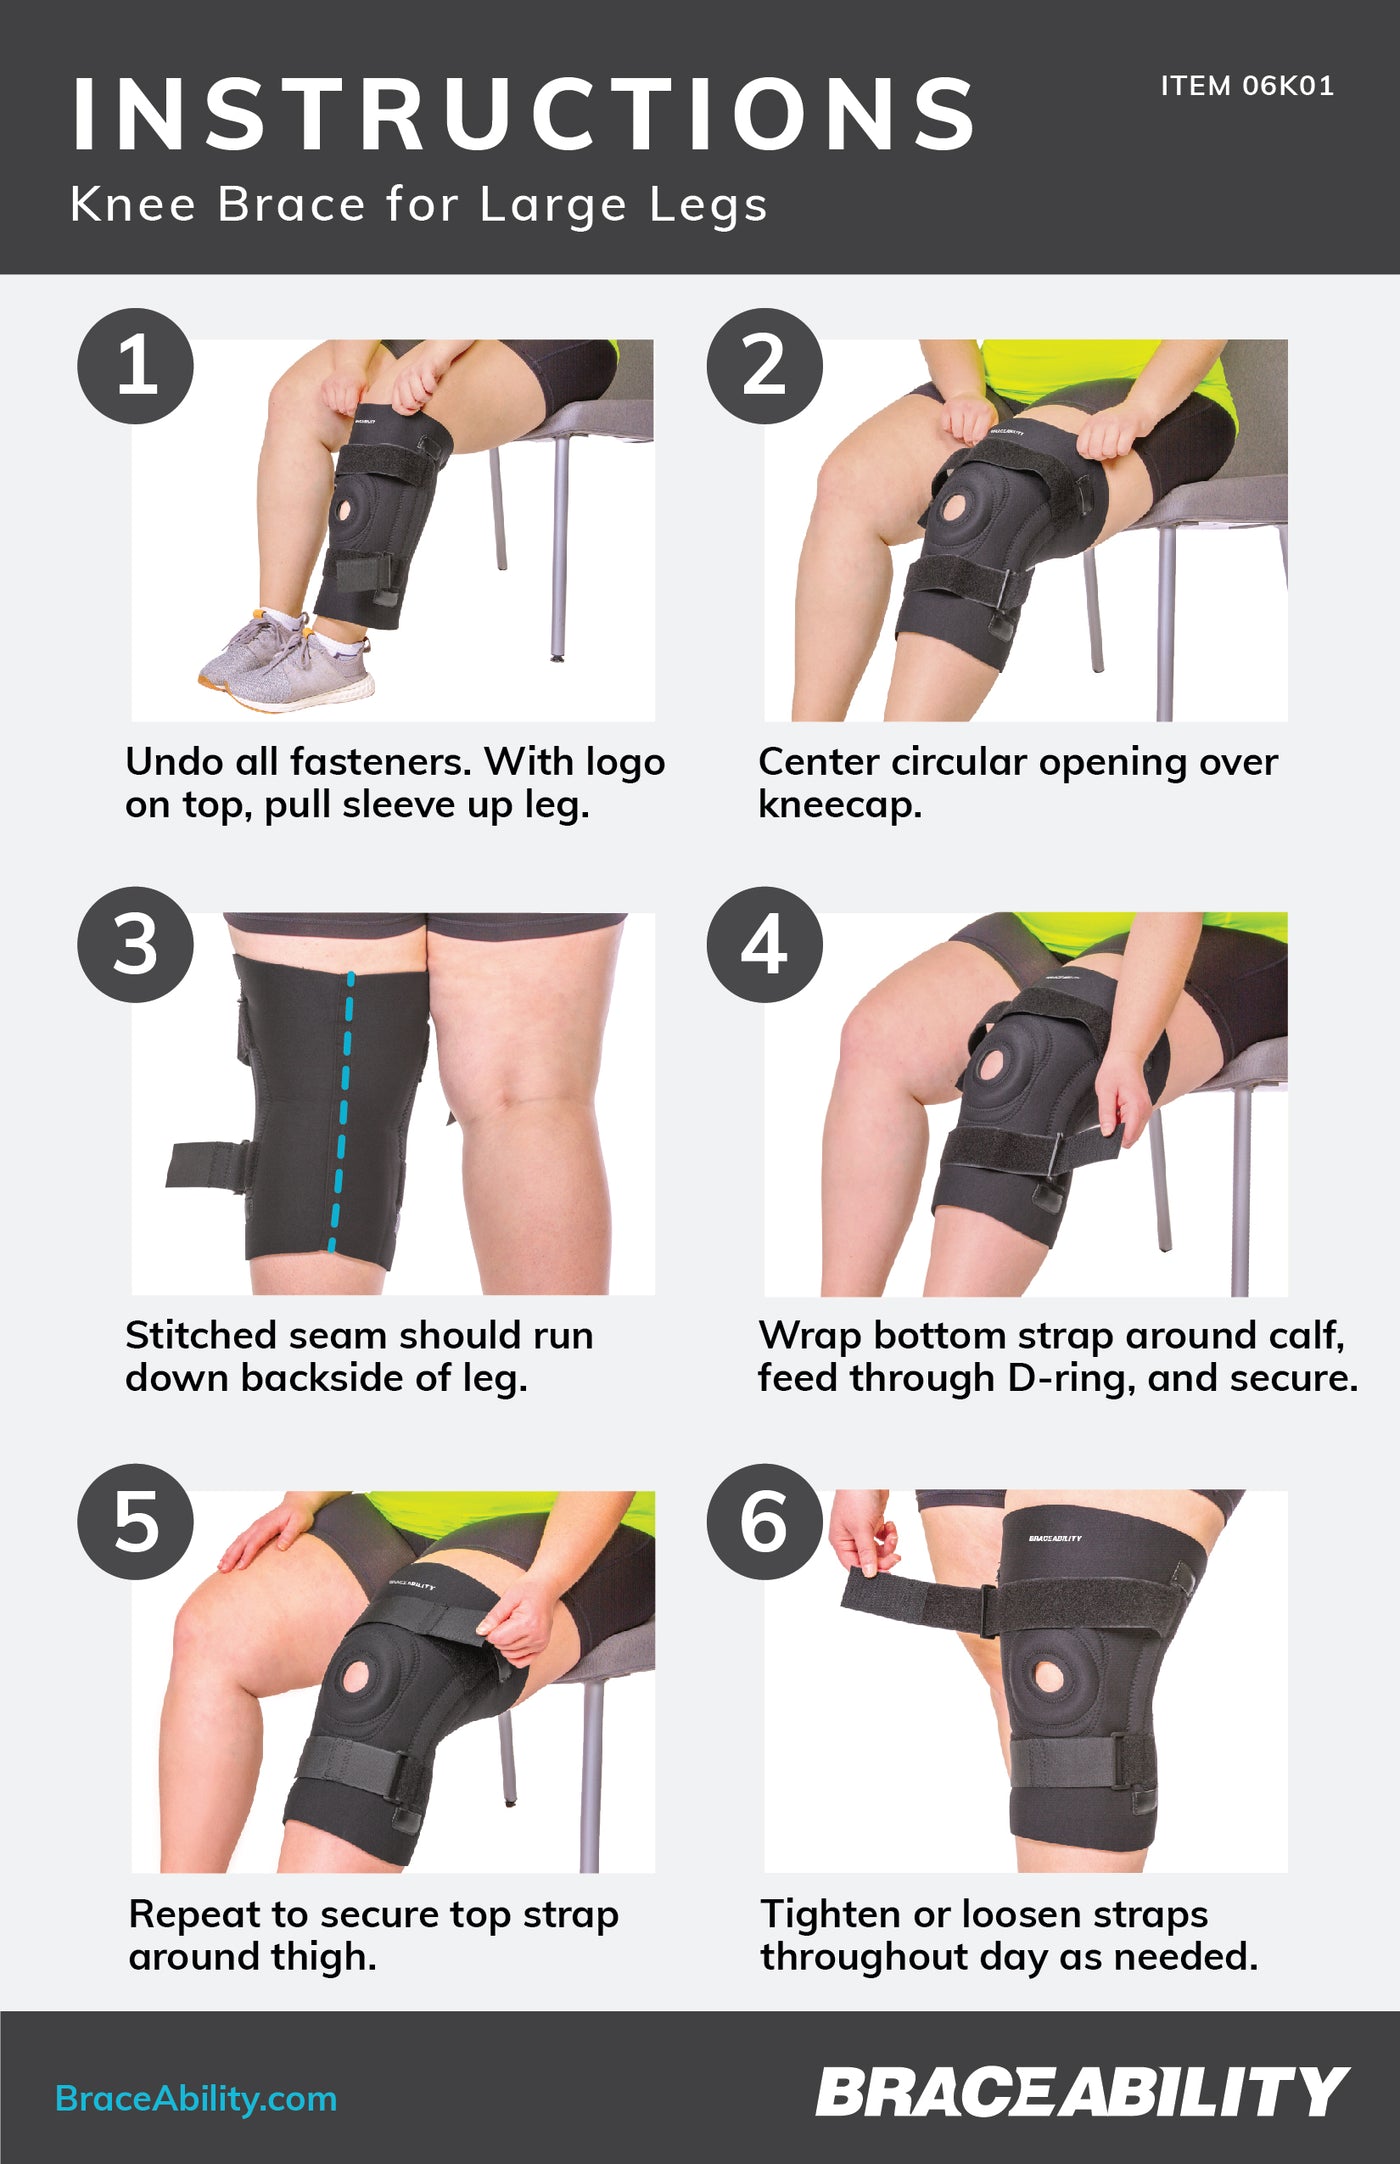 How to put on the knee brace for large legs instruction sheet